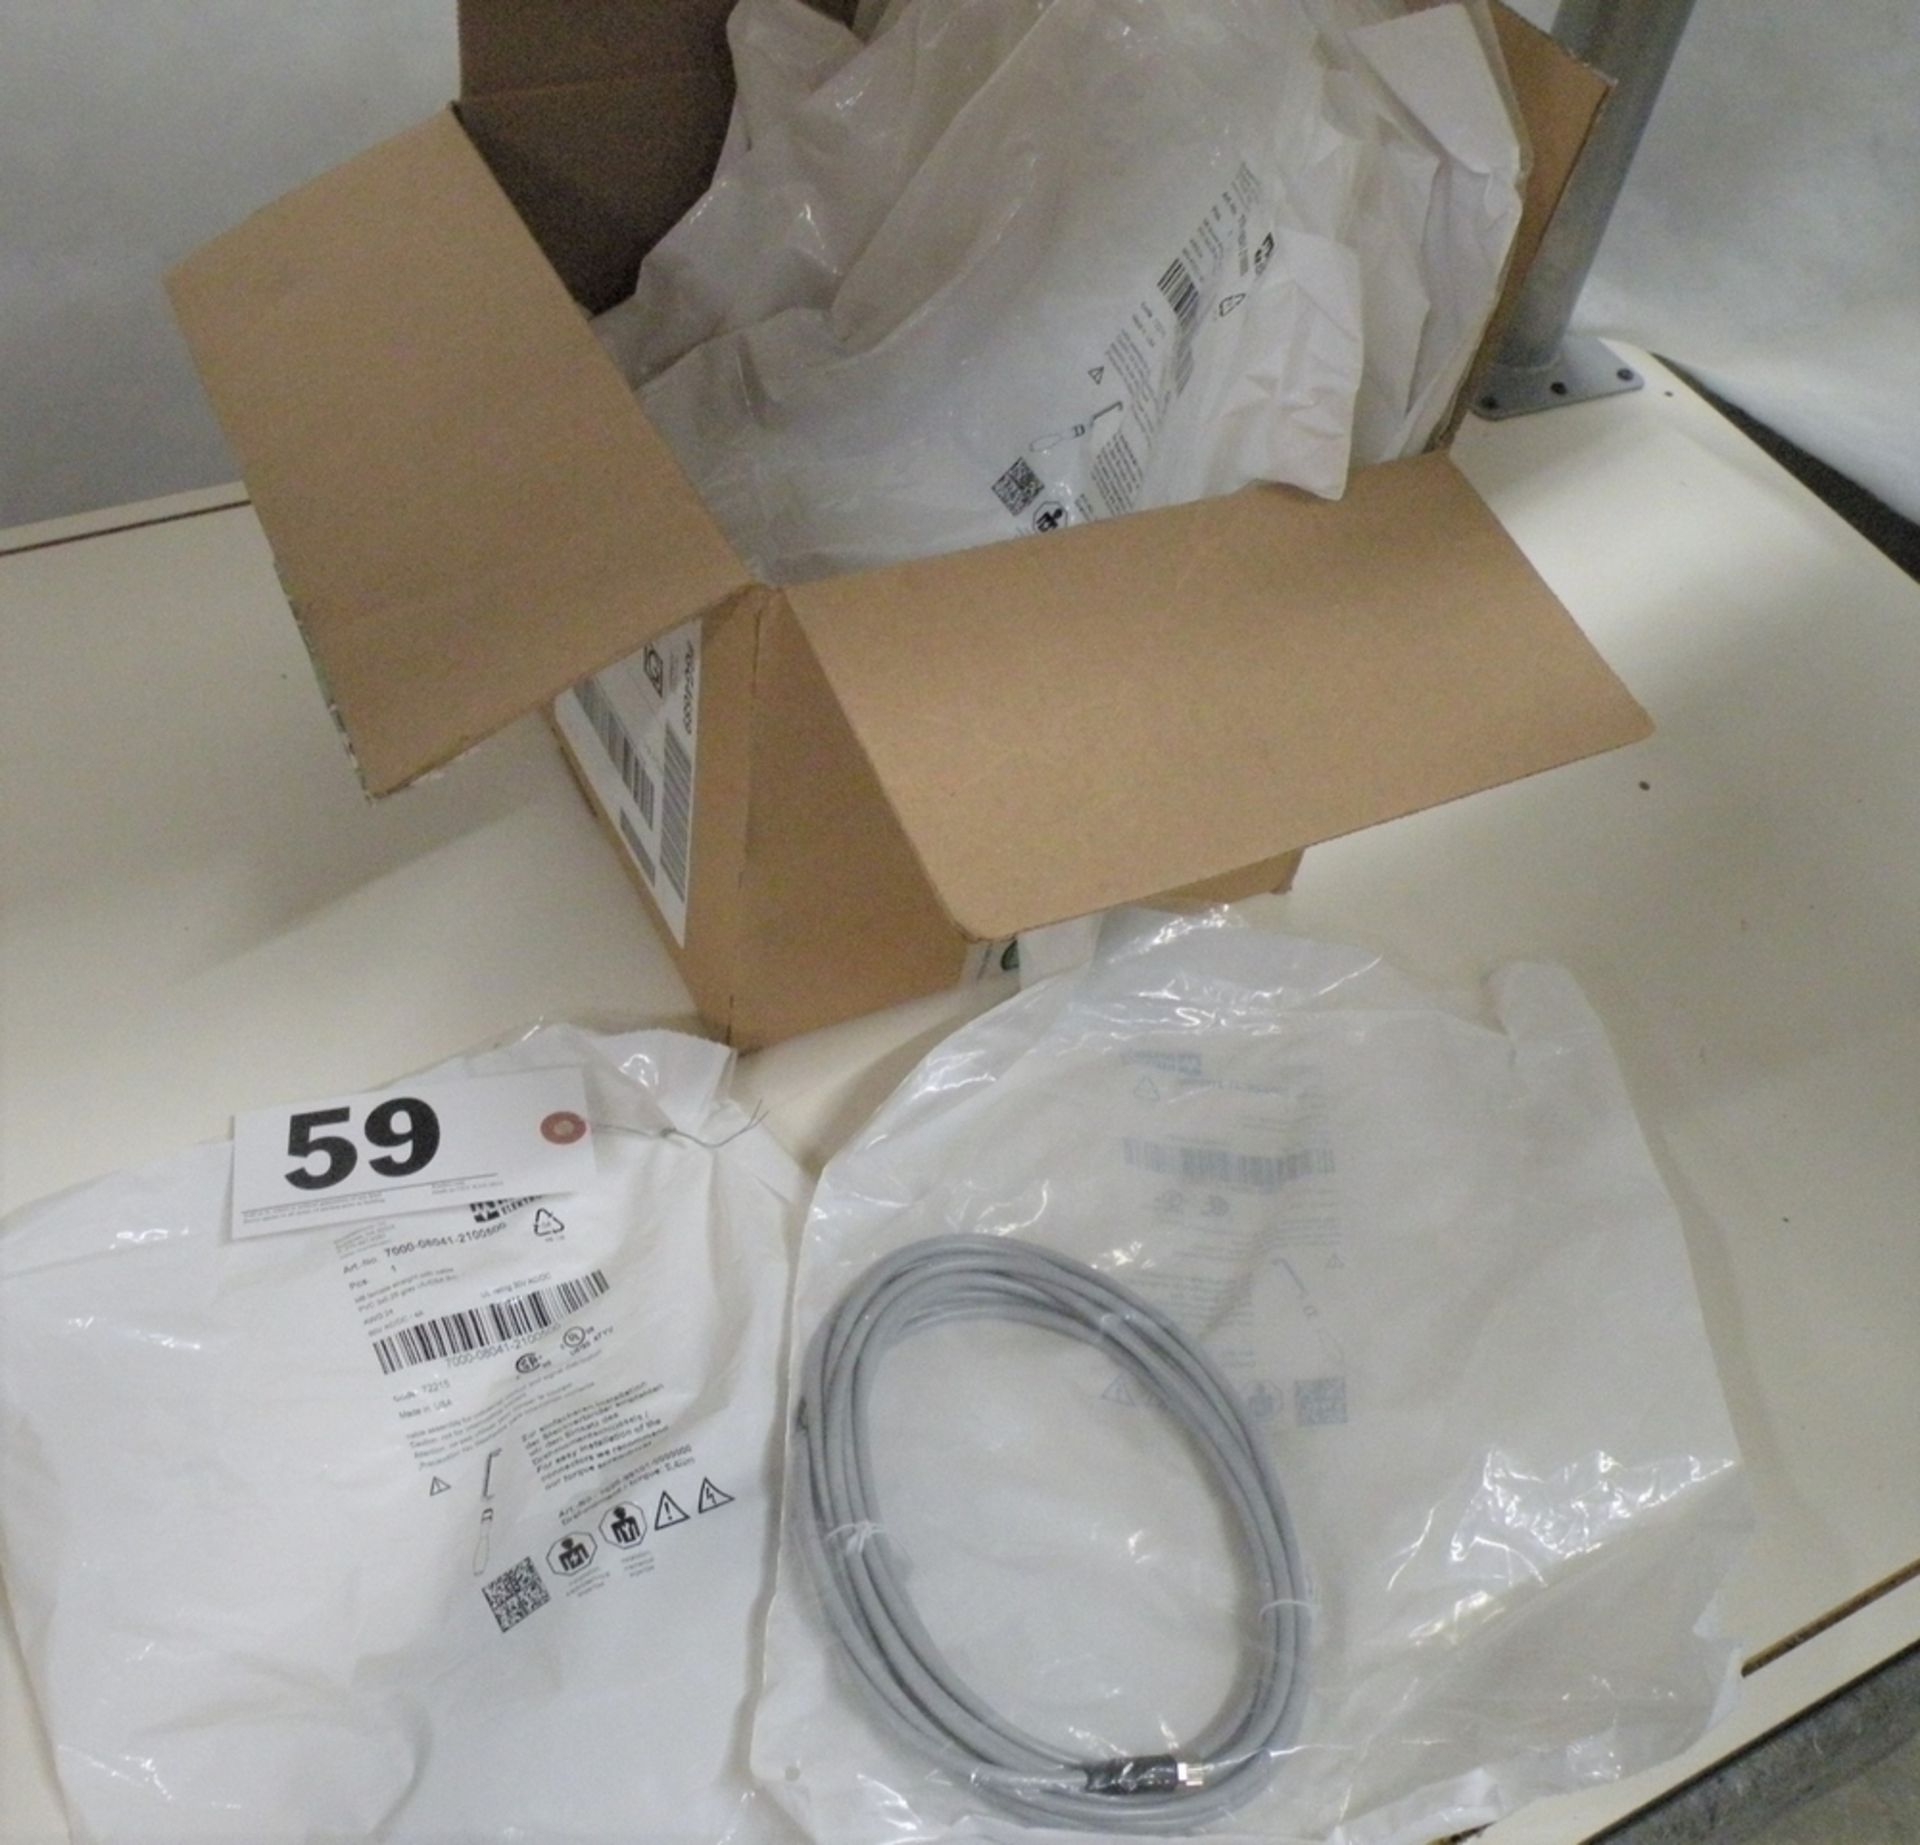 (10) MURR M8 Female Straight with Cable, #7000-08041-2100500, New In Box (S Fulton, TN)